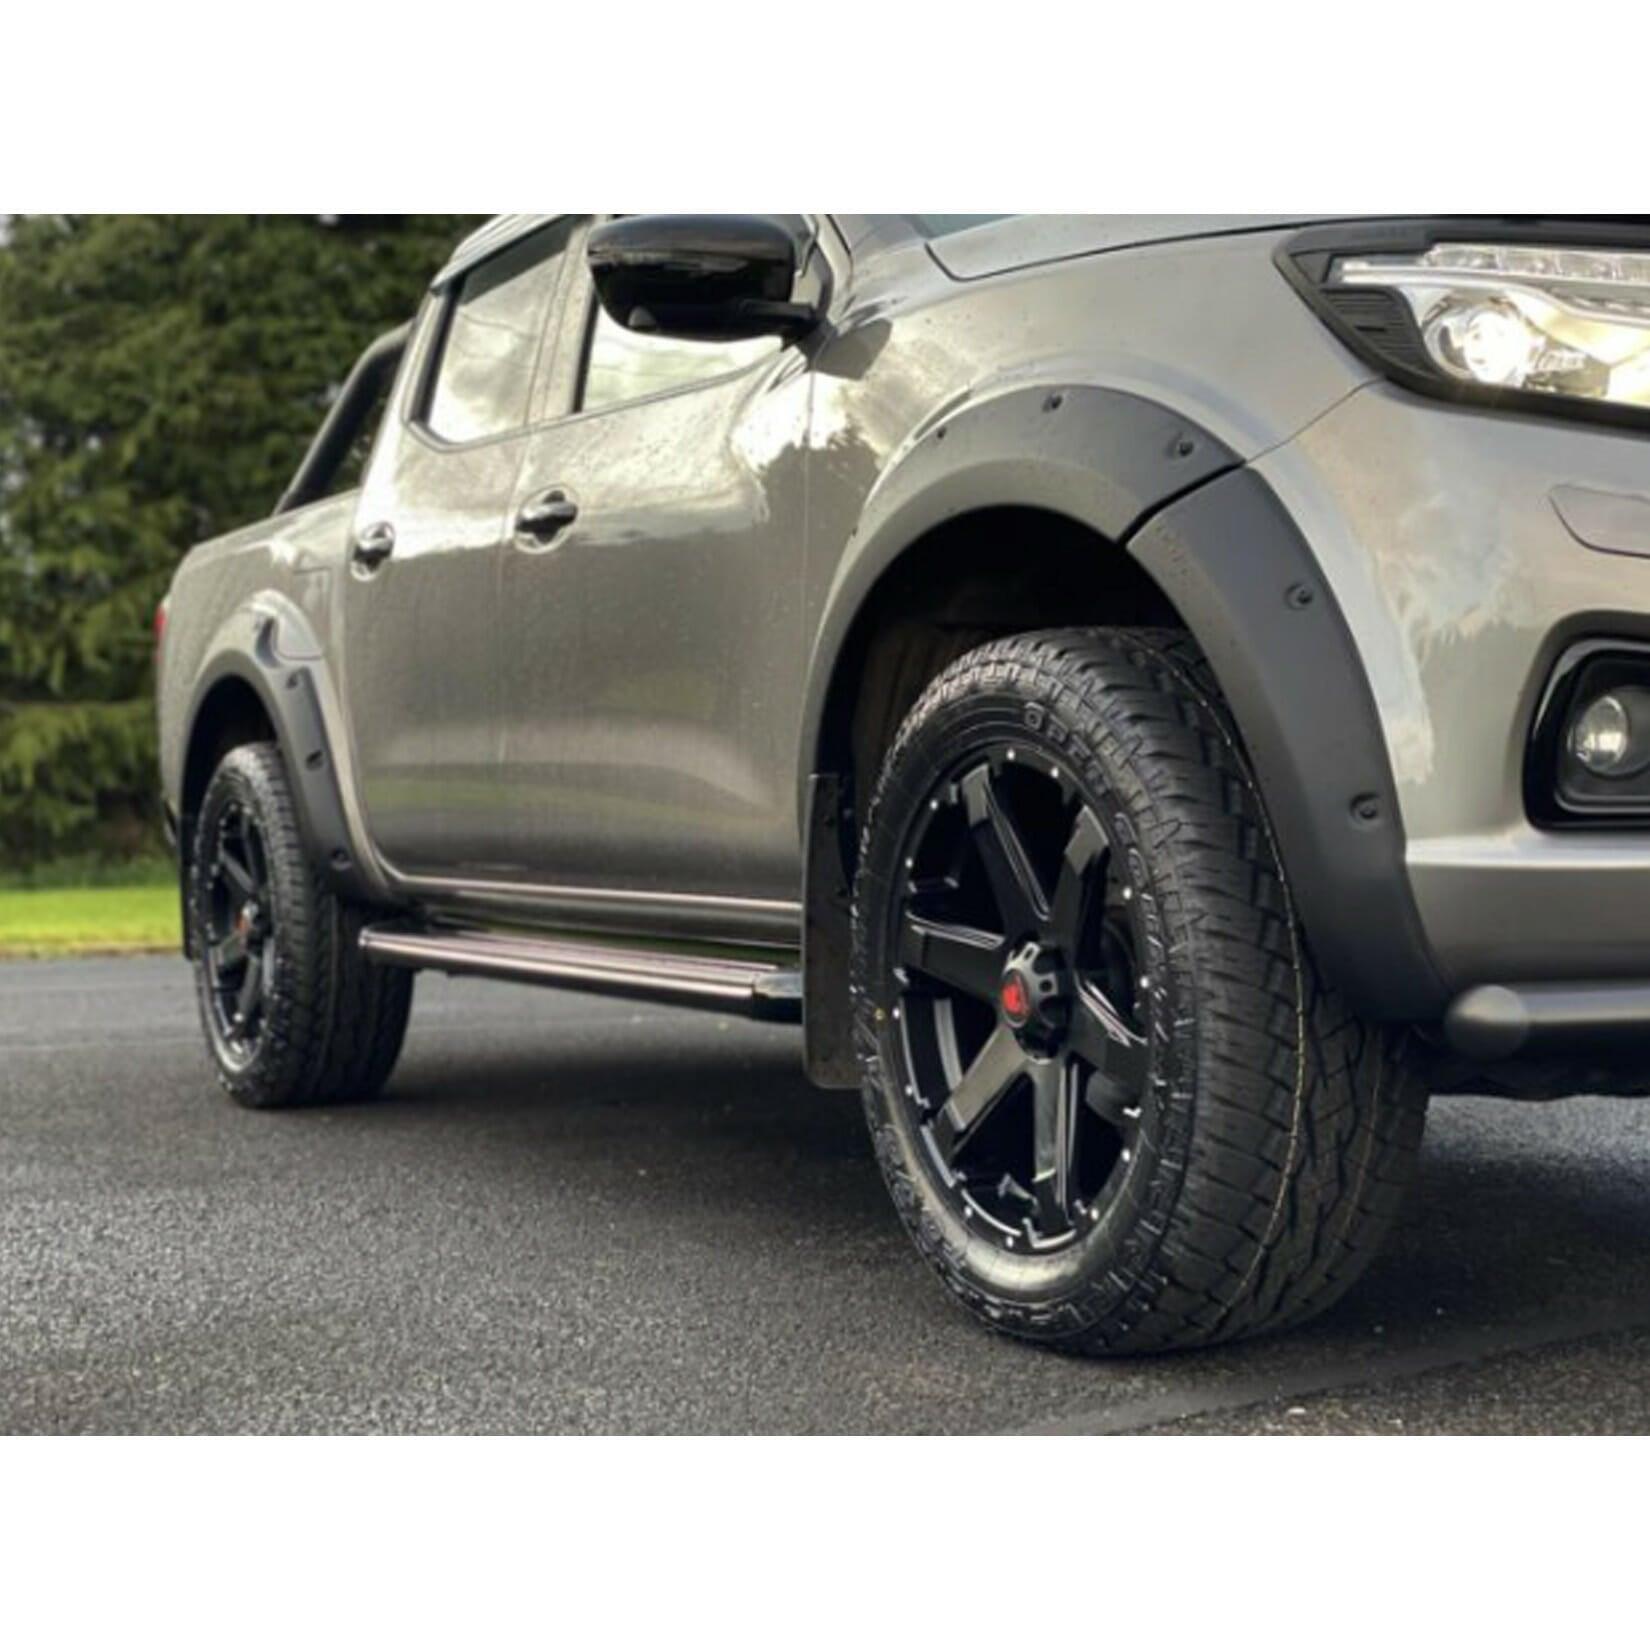 NISSAN NAVARA NP300 2016 ON - DOUBLE CAB RUNNING BOARDS - SIDE STEPS - OE STYLE - PAIR - BLACK - Storm Xccessories2